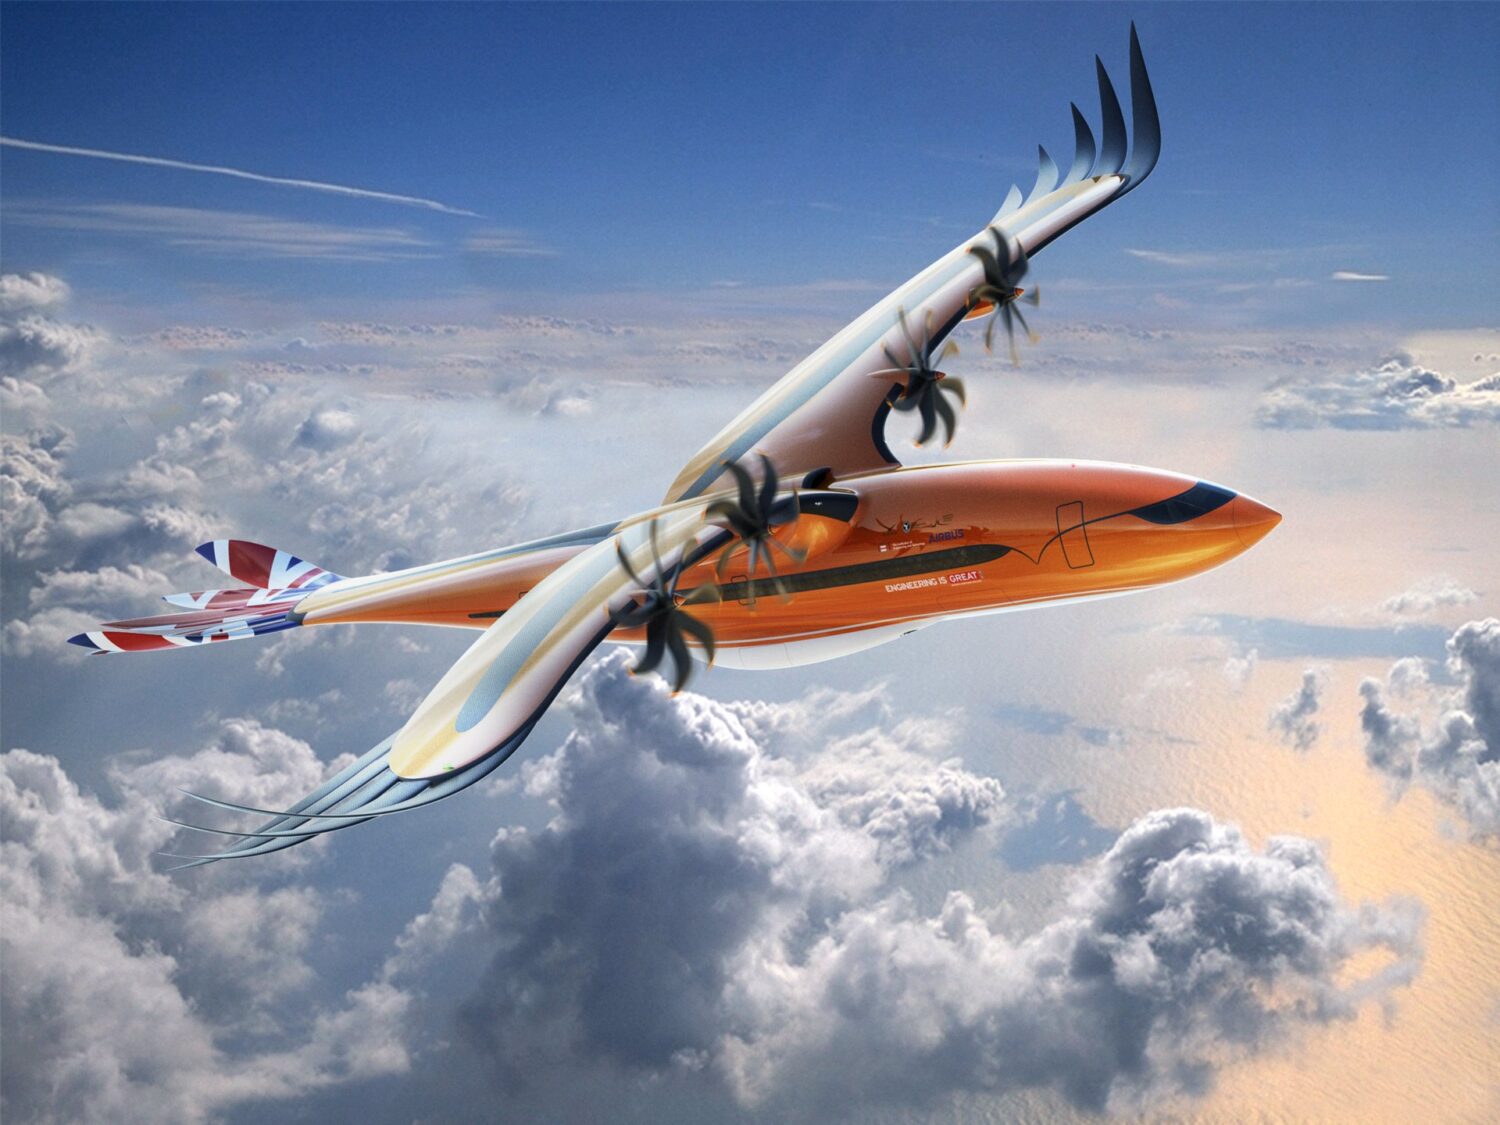 https://www.airbus.com/newsroom/news/en/2019/07/airbus-conceptual-airliner-to-inspire-new-generation-engineers.html